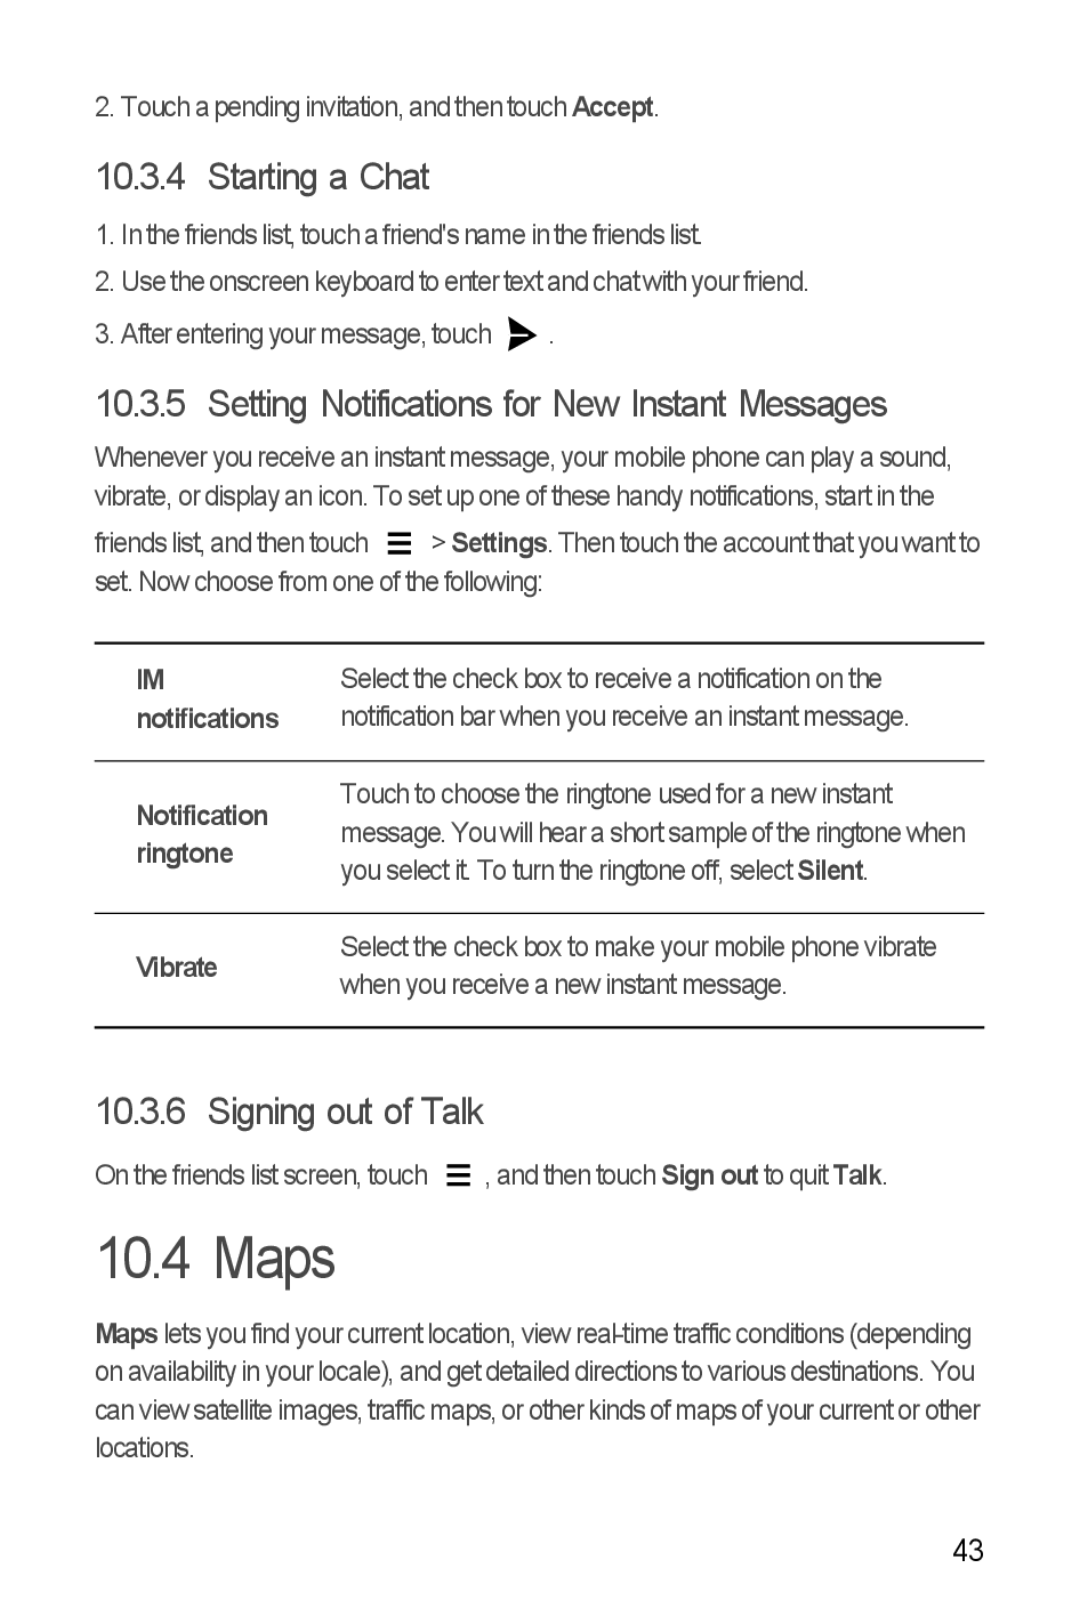 Huawei H881C Maps, Starting a Chat, Setting Notifications for New Instant Messages, Signing out of Talk, notifications 